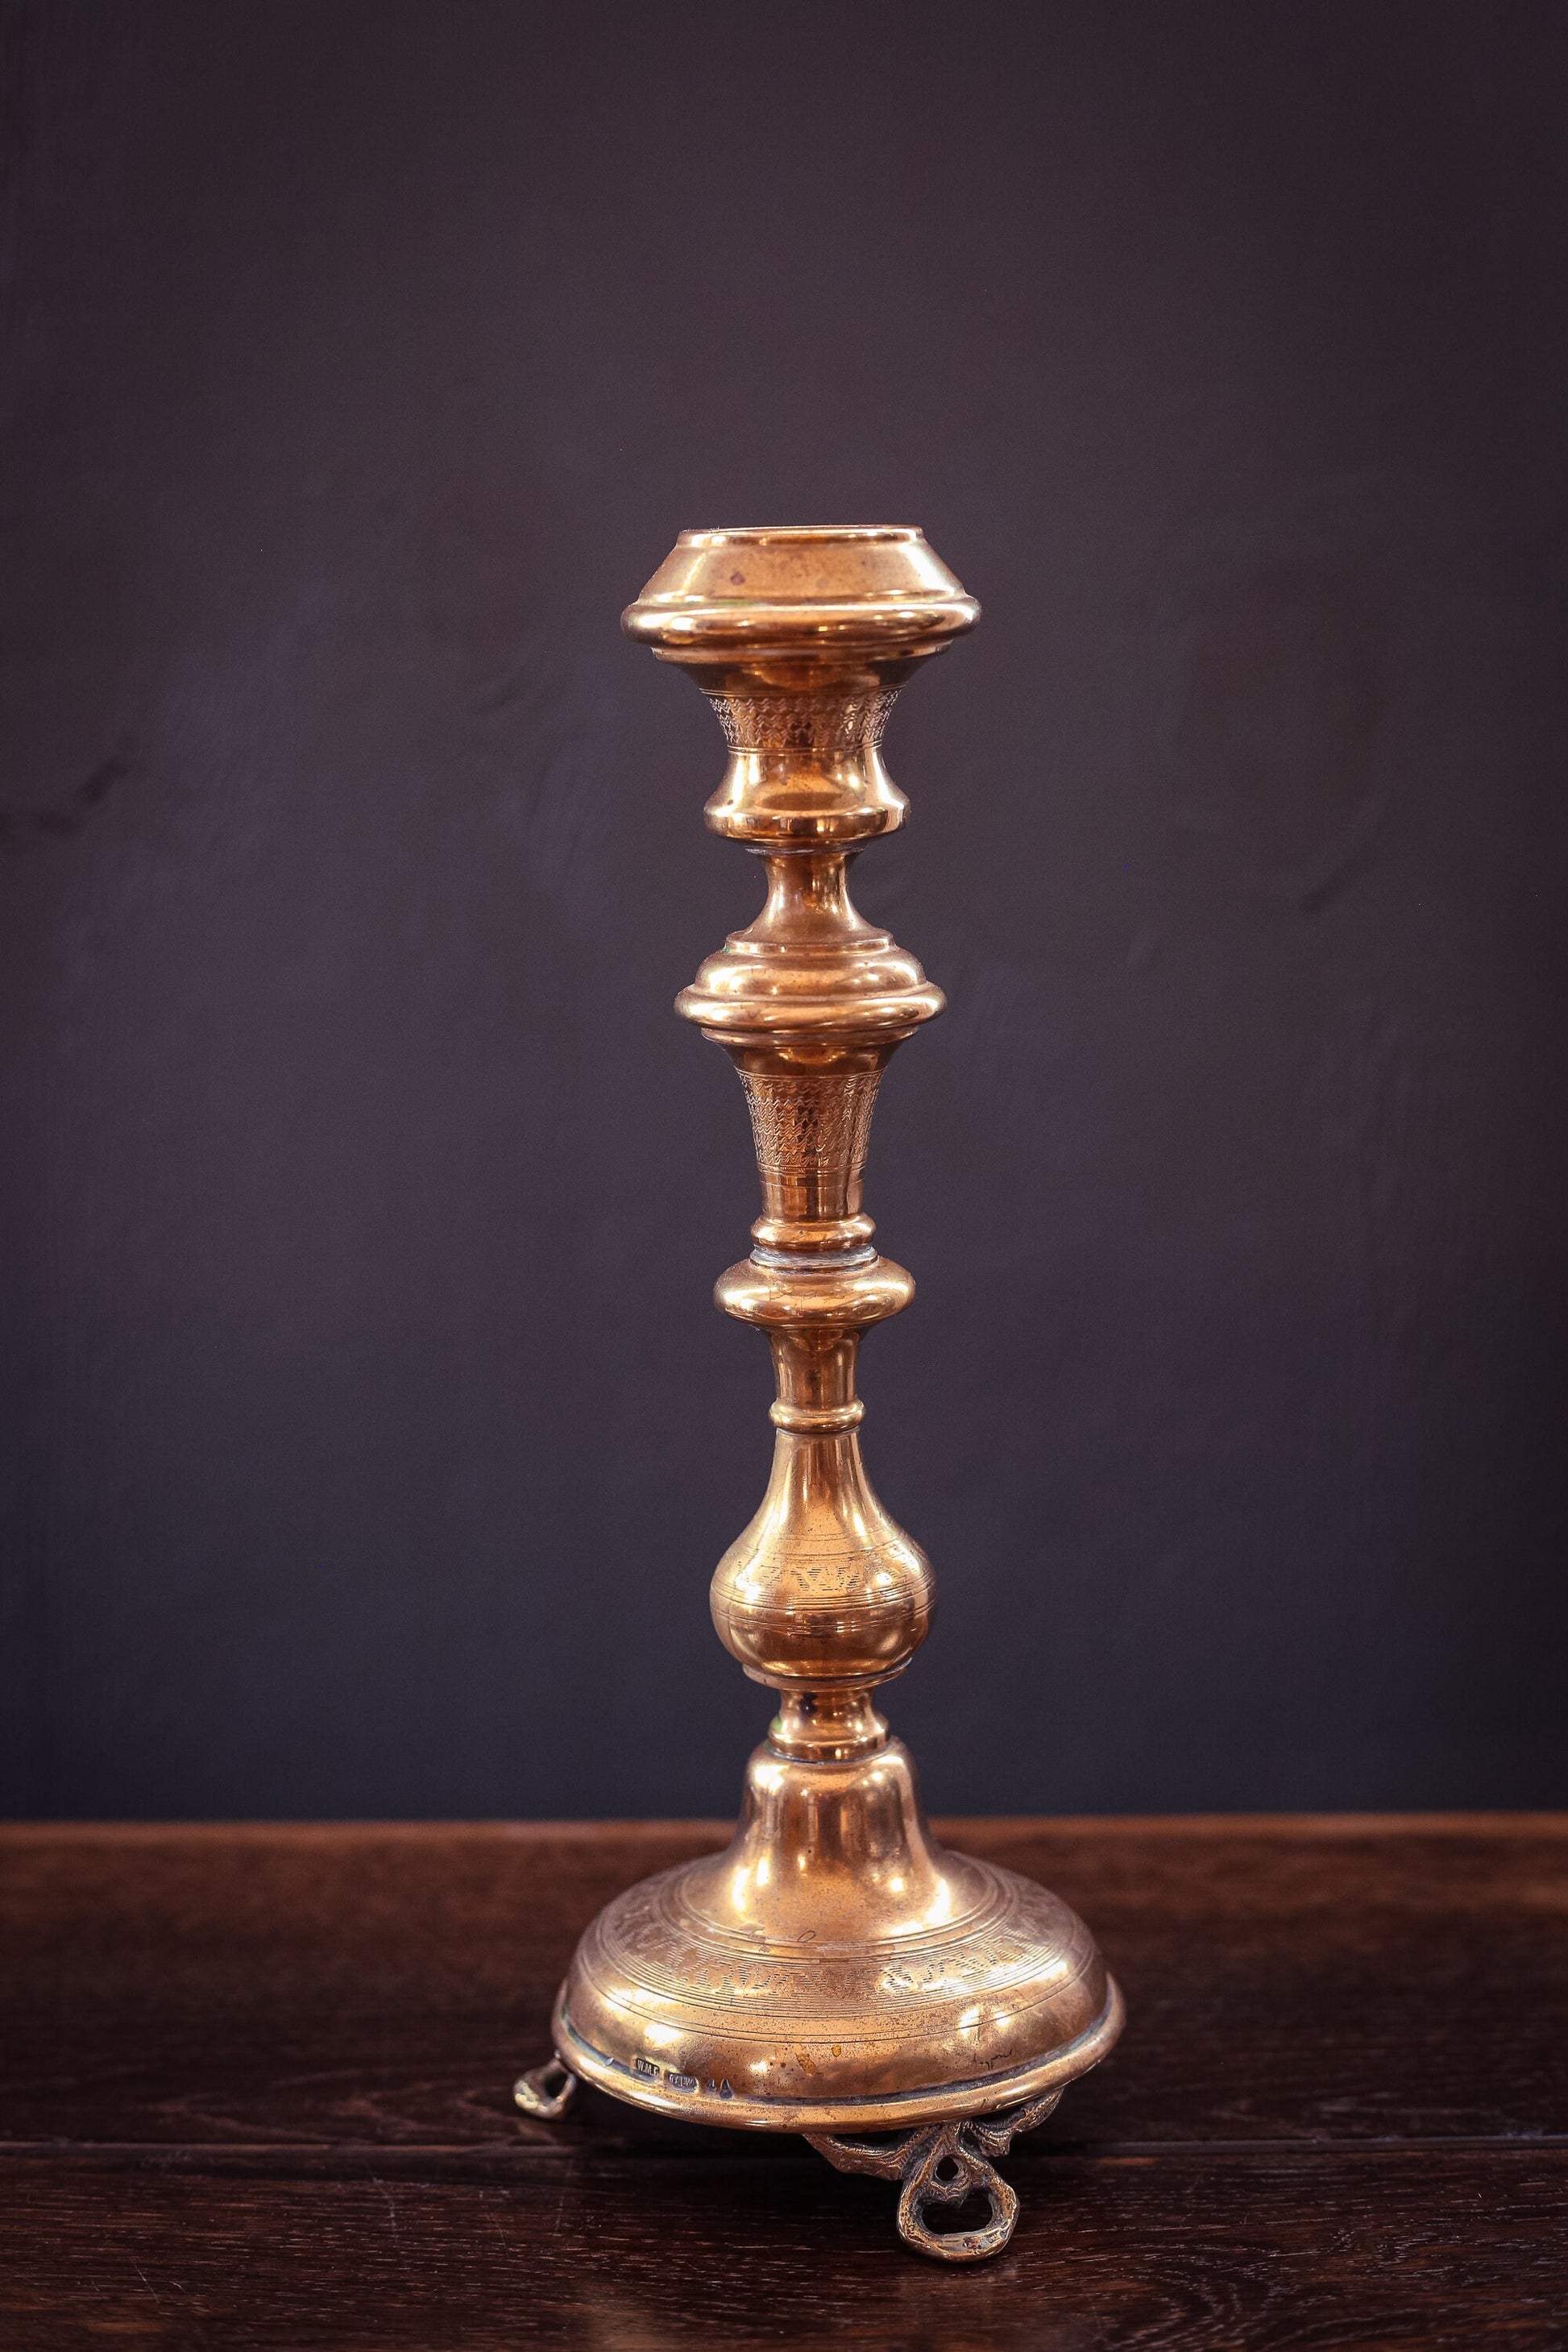 Tall Brass Engraved Candlestick Holder with Decorative Feet - Vintage Brass Candle Base